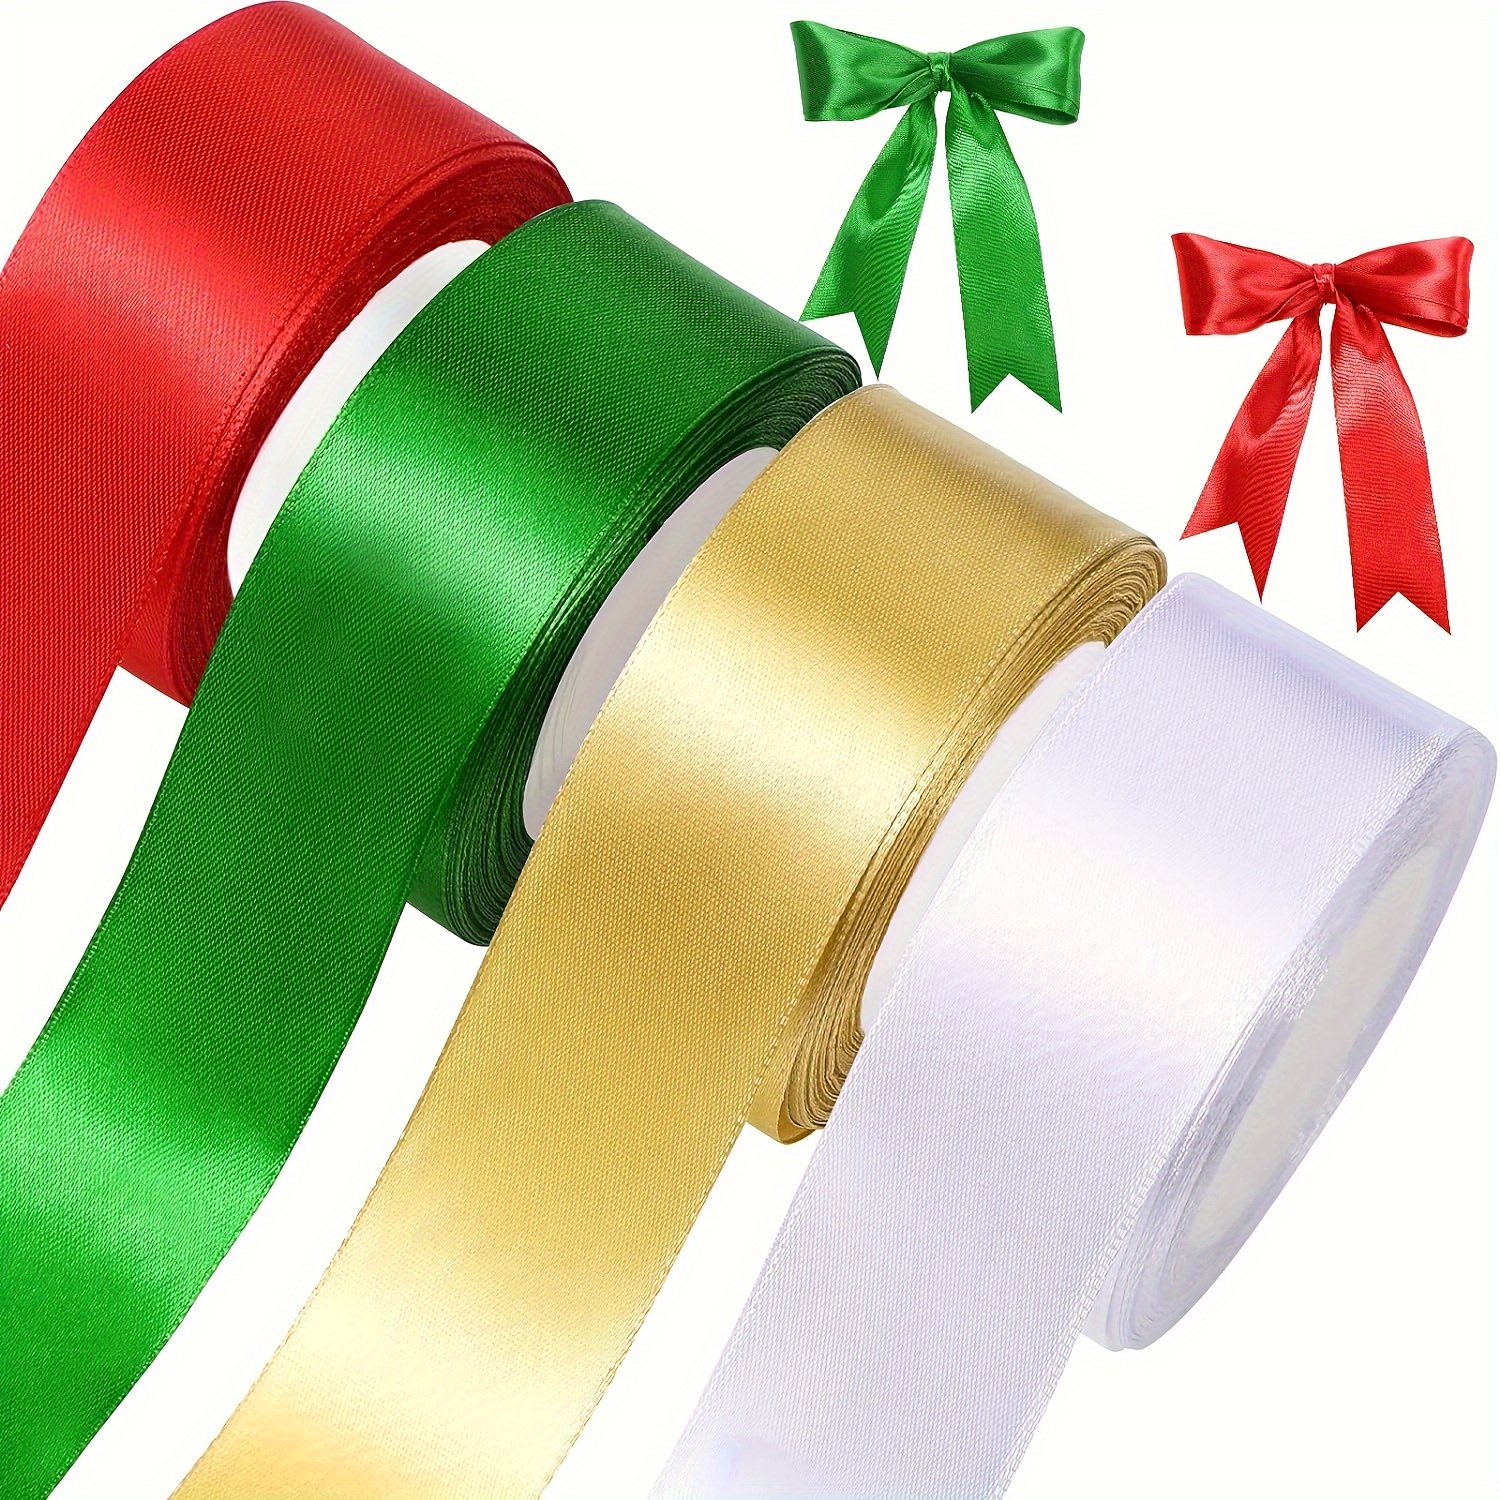 3 Rolls Wide Christmas Ribbon 70 Yards 2 inch Wide Polyester Satin Ribbon  Solid Gold Red Green Ribbons for Christmas Gift Wrapping Wedding Crafts